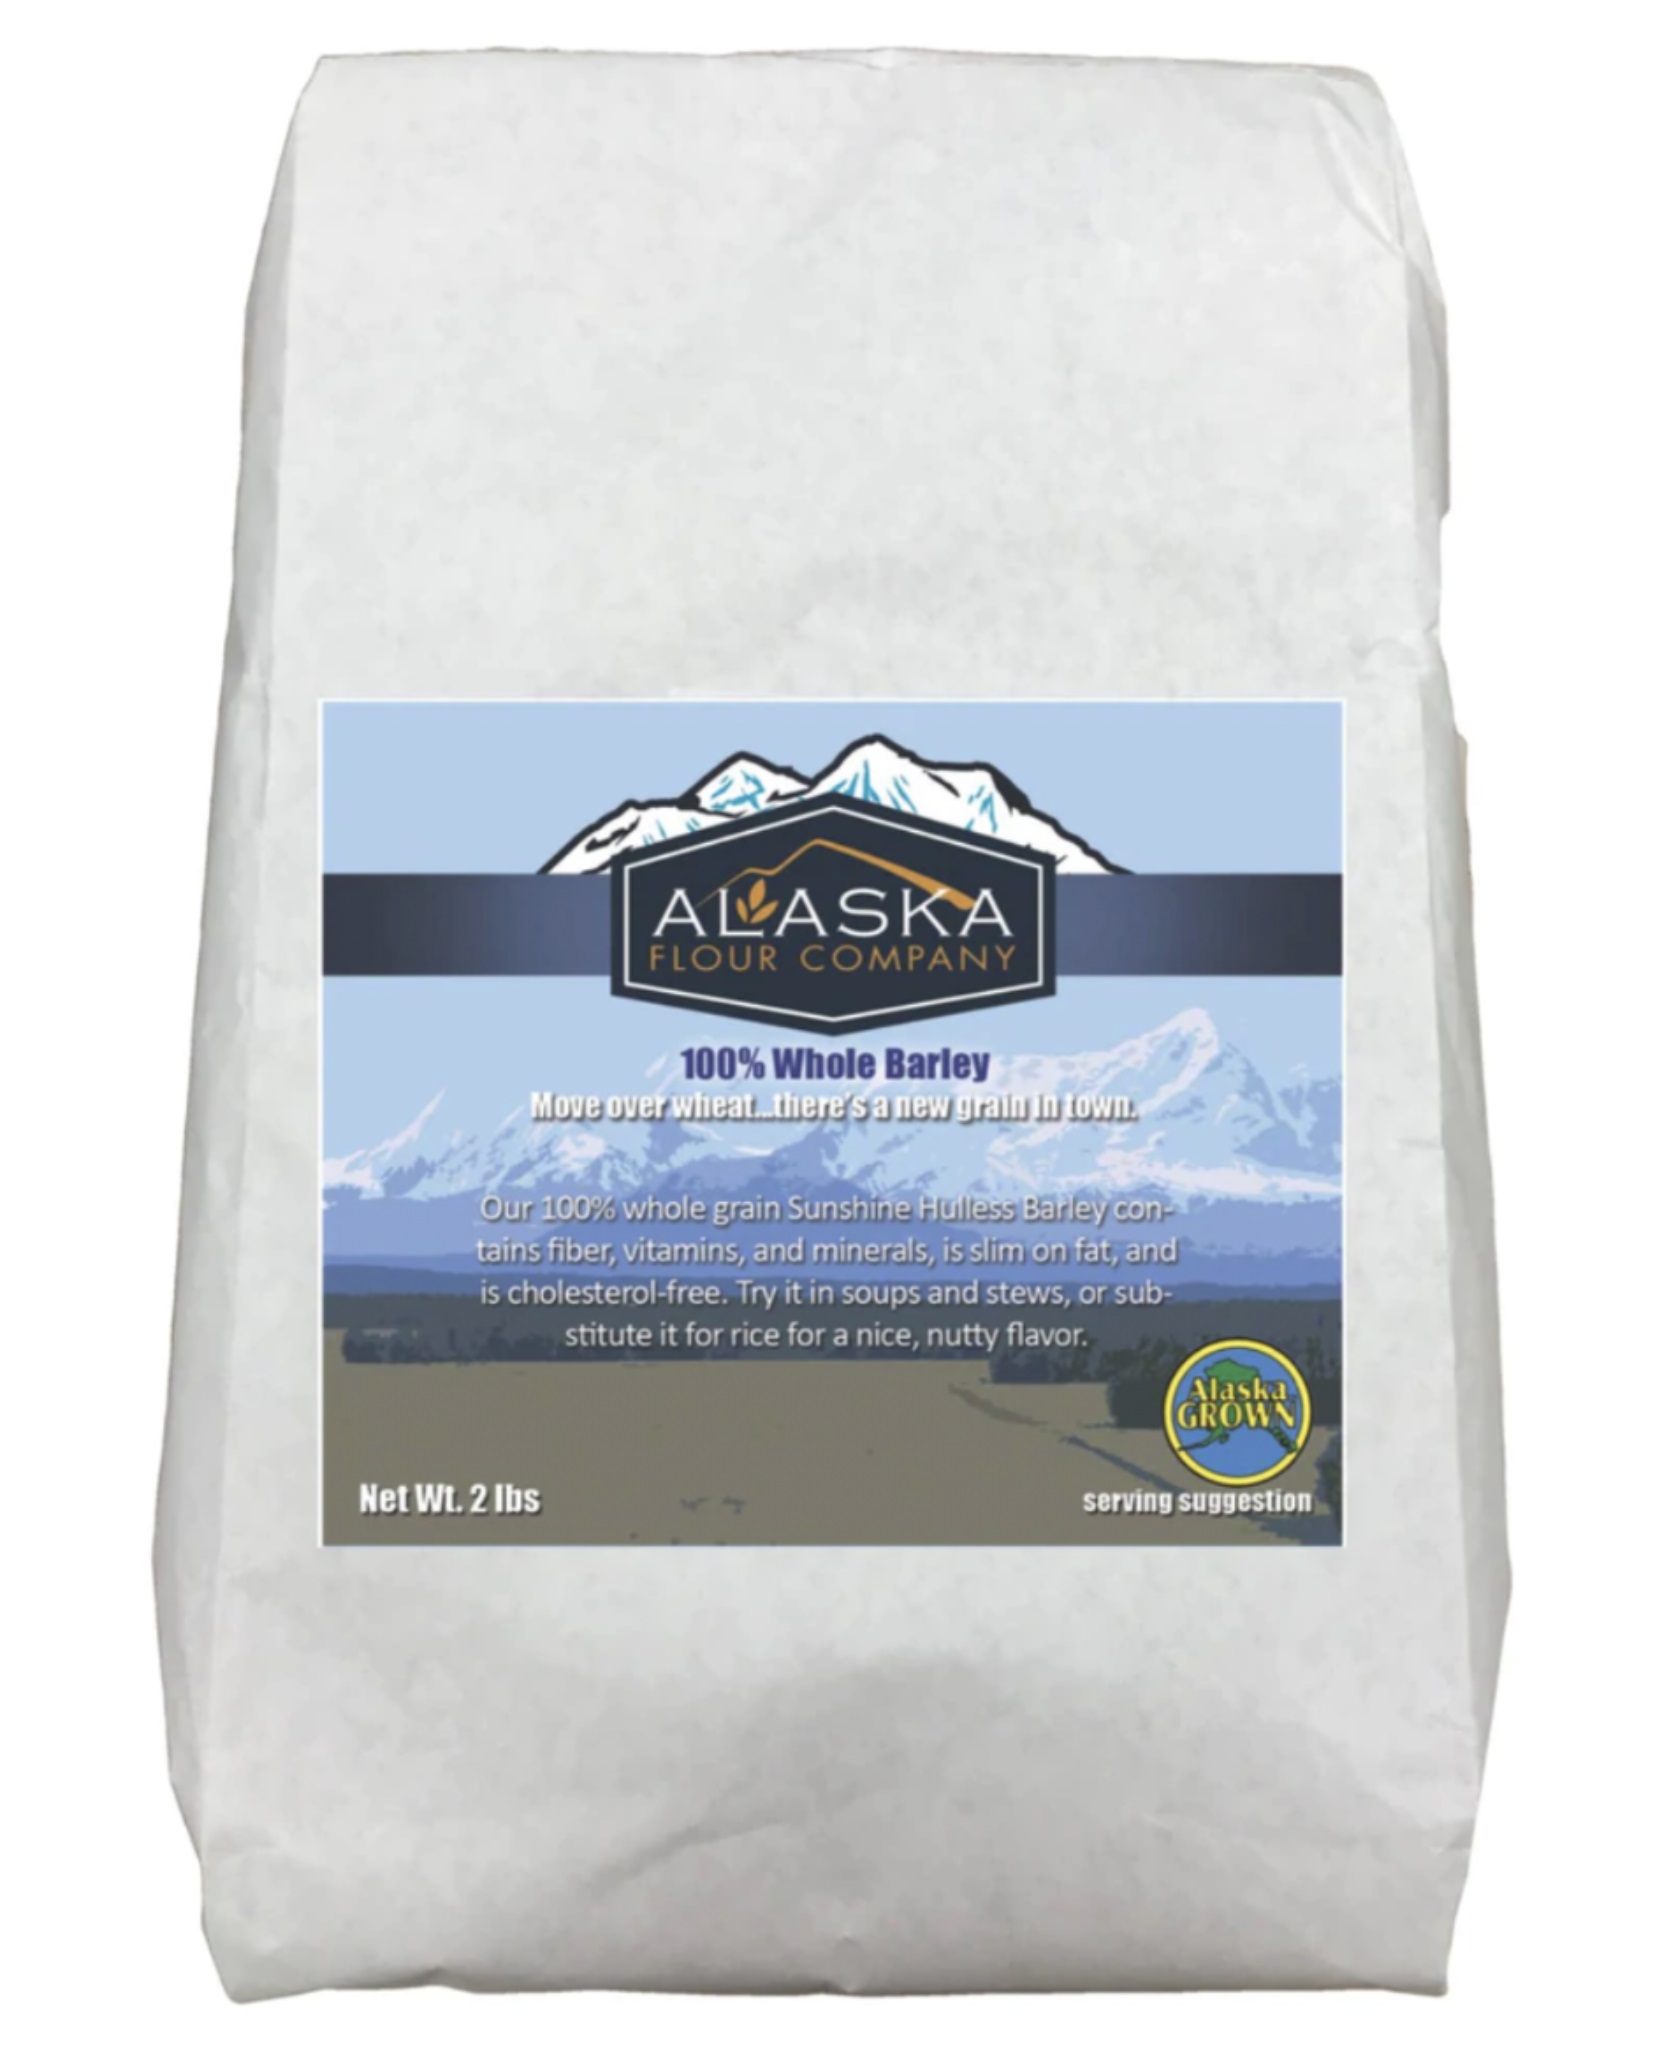 Barley Whole Hulless 25lb AK Flour Company - Sold by PACK